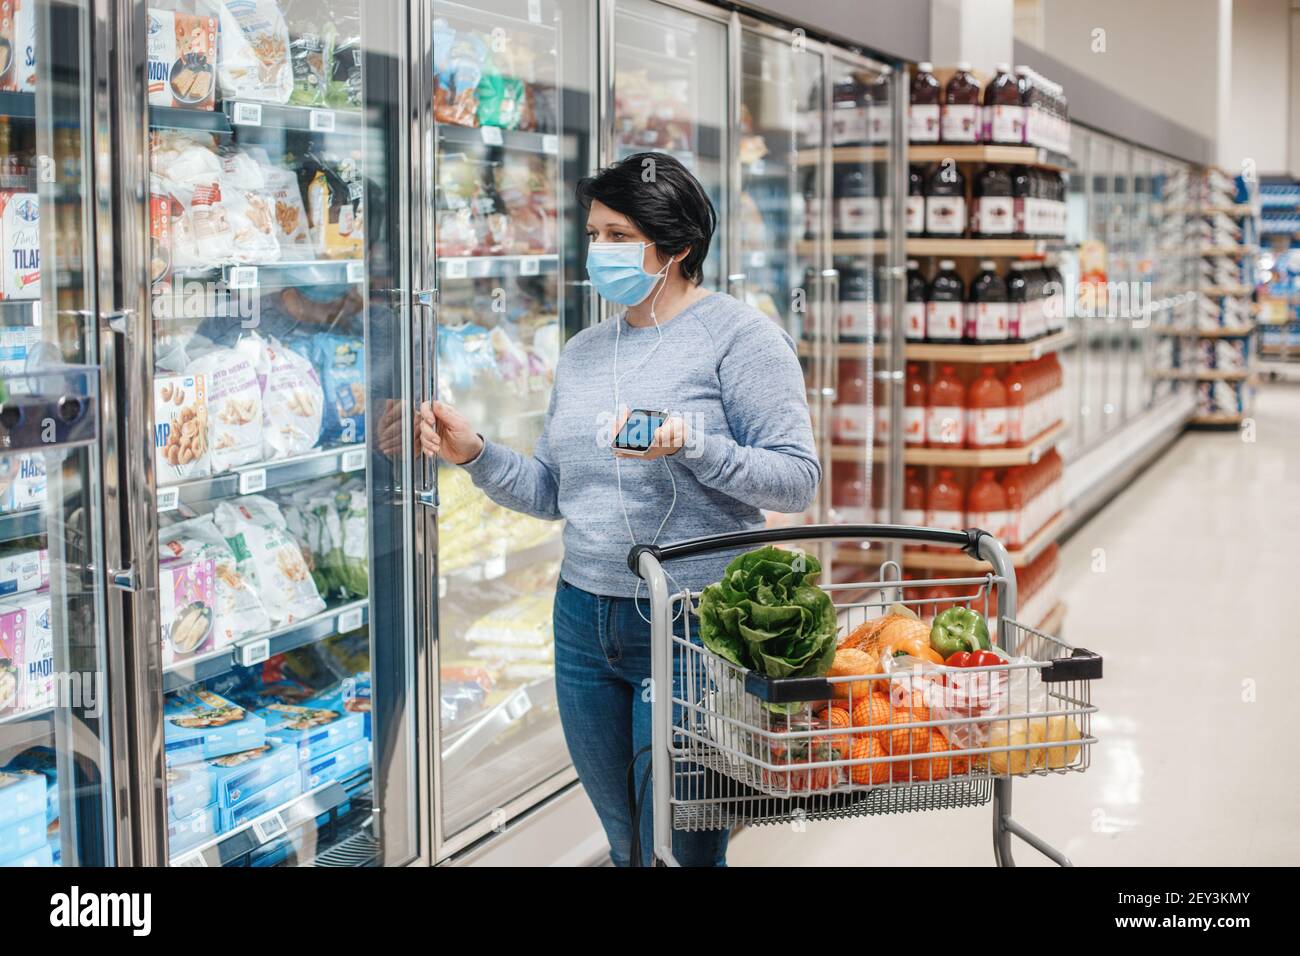 Toronto, Ontario, Canada - February 26, 2021: Middle age brunette woman shopping in grocery store supermarket and talking on audio chat live stream ph Stock Photo